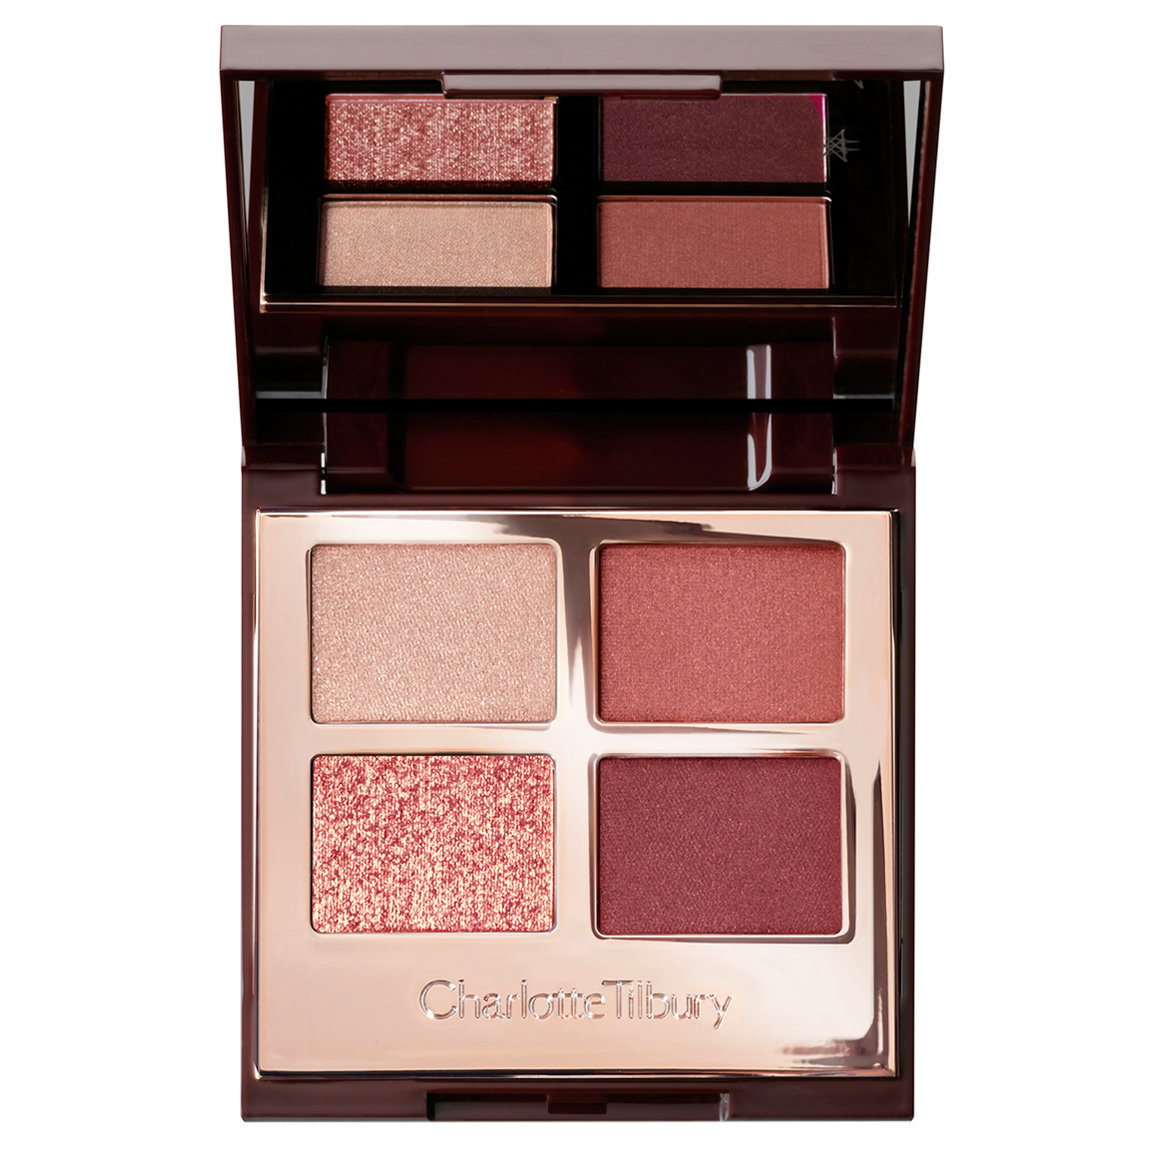 Free full-size Luxury Palette with qualifying Charlotte Tilbury purchase